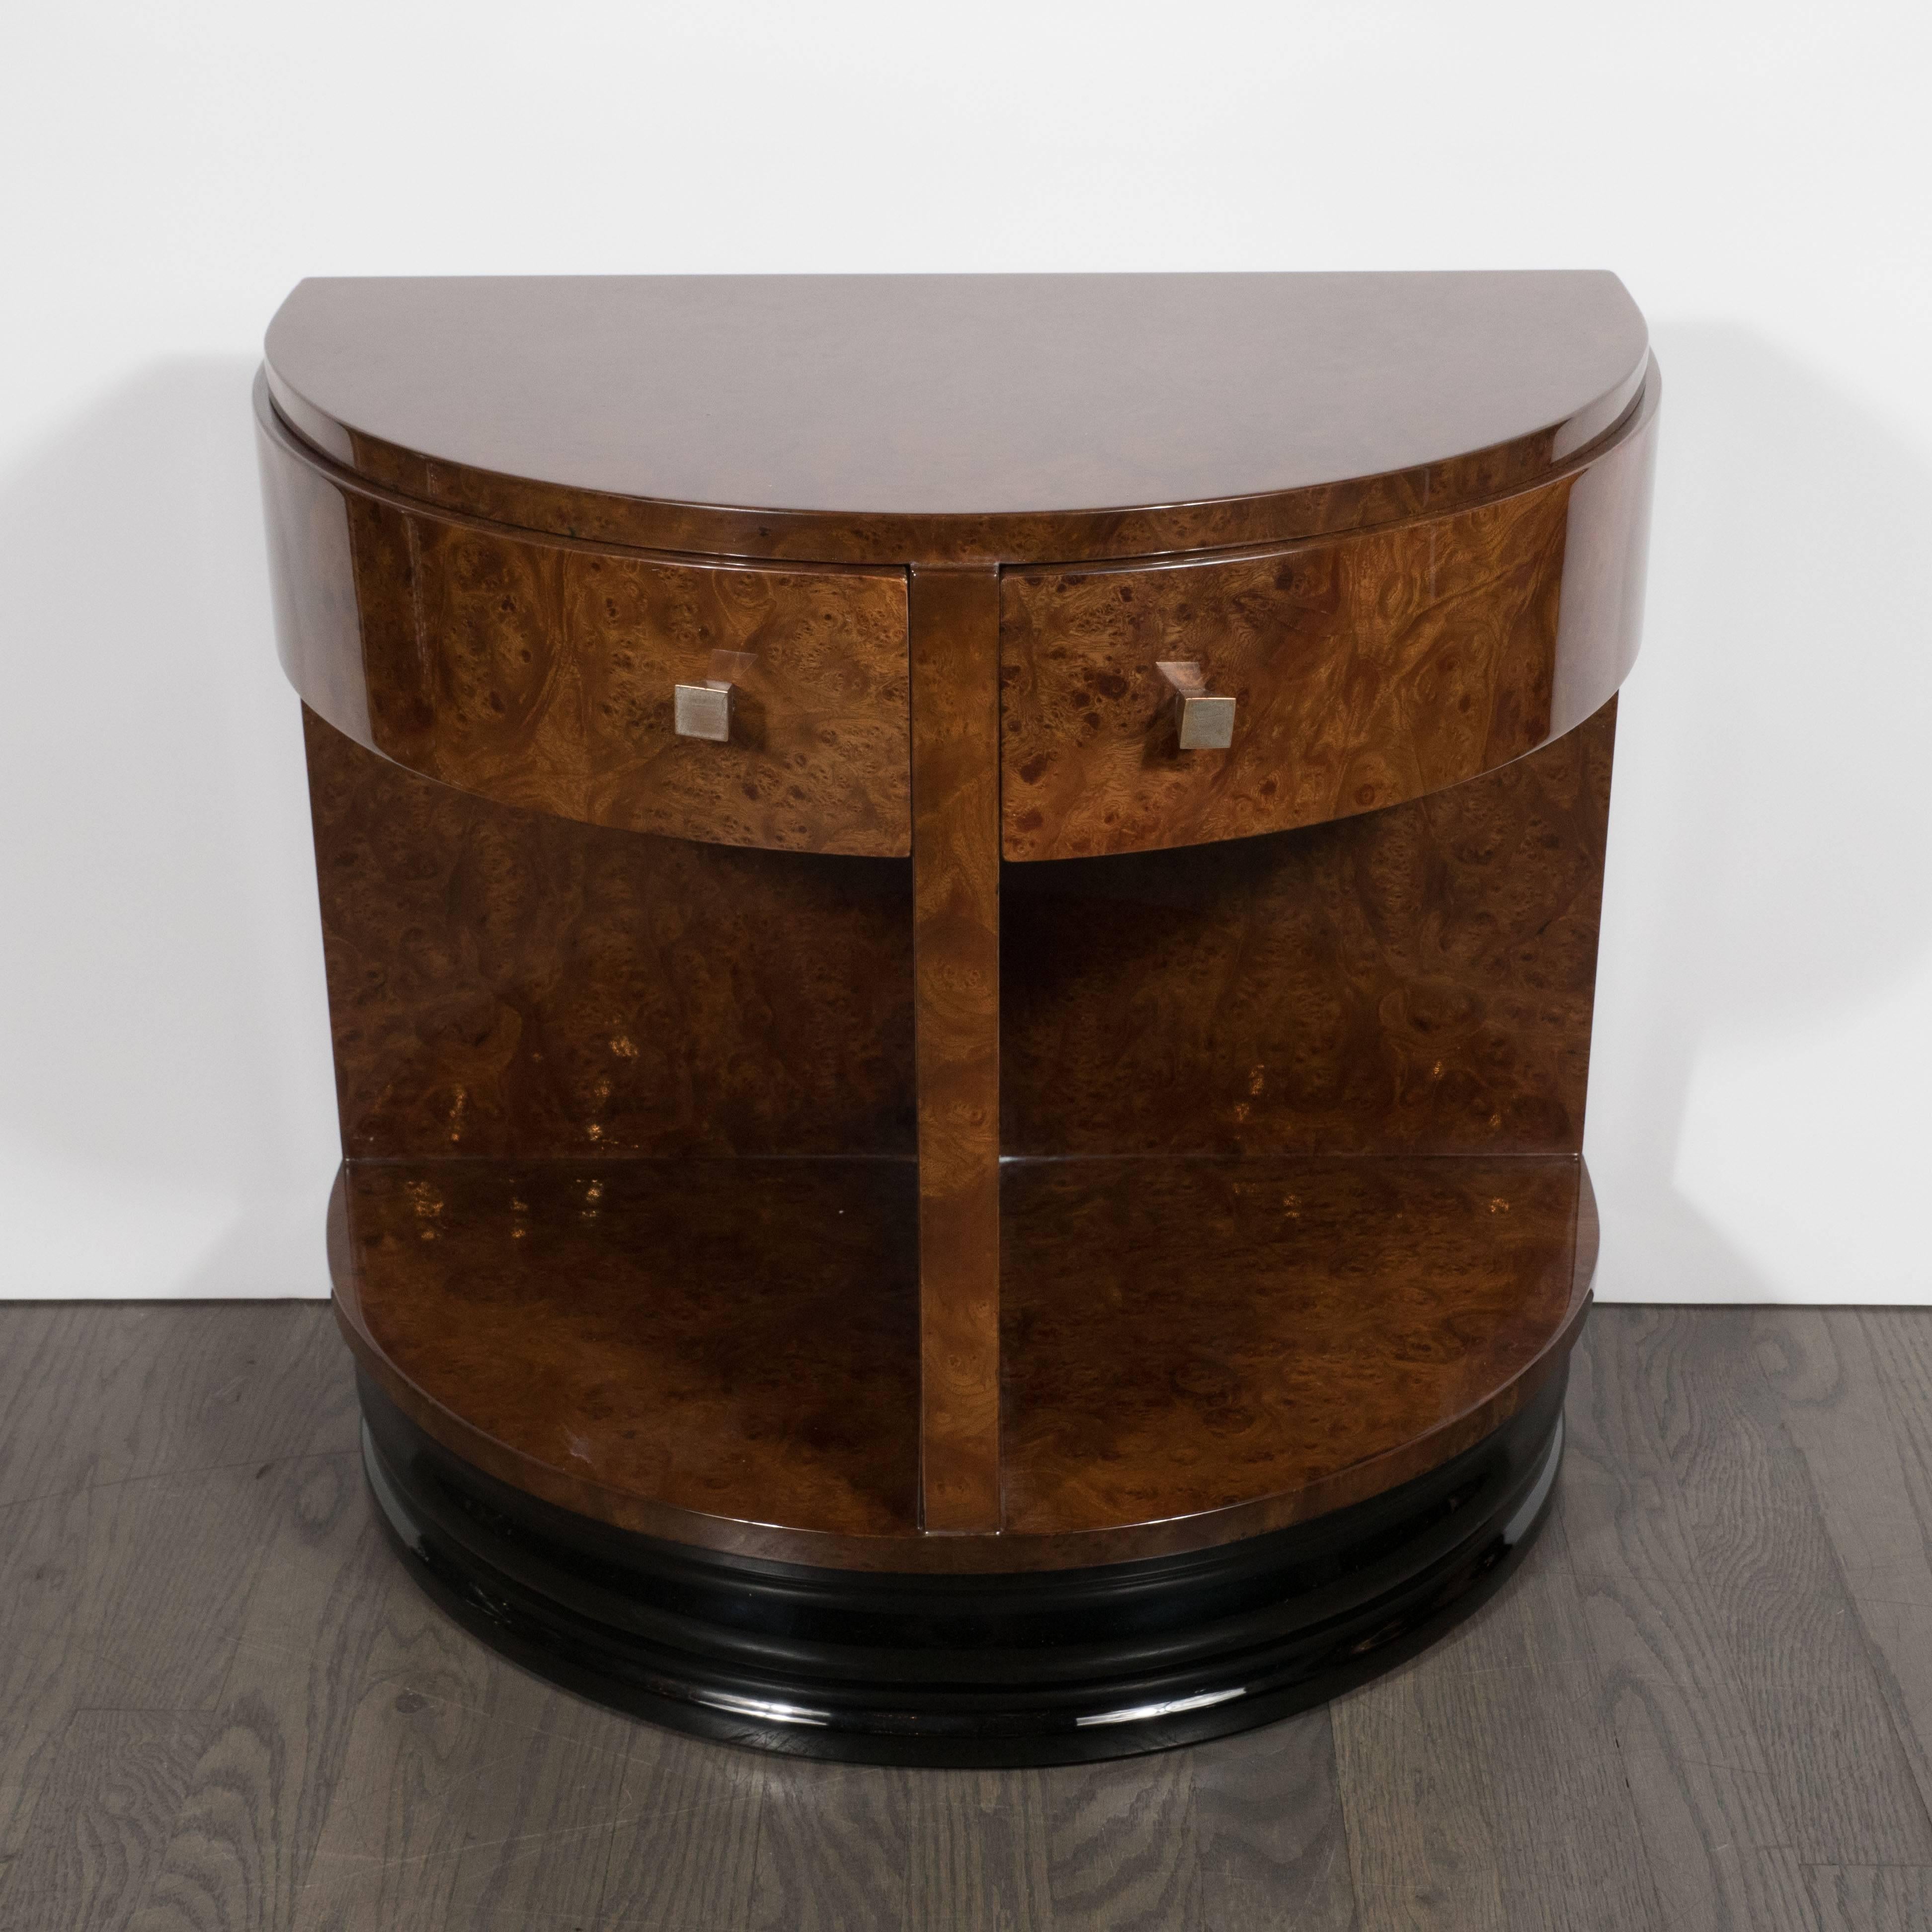 This important (and striking) side table was realized by Donald Deskey- the legendary American designer of Radio City Music Hall- for the Widdicomb Company, circa 1935. Executed in book-matched Carpathian elm- that displays a stunning natural